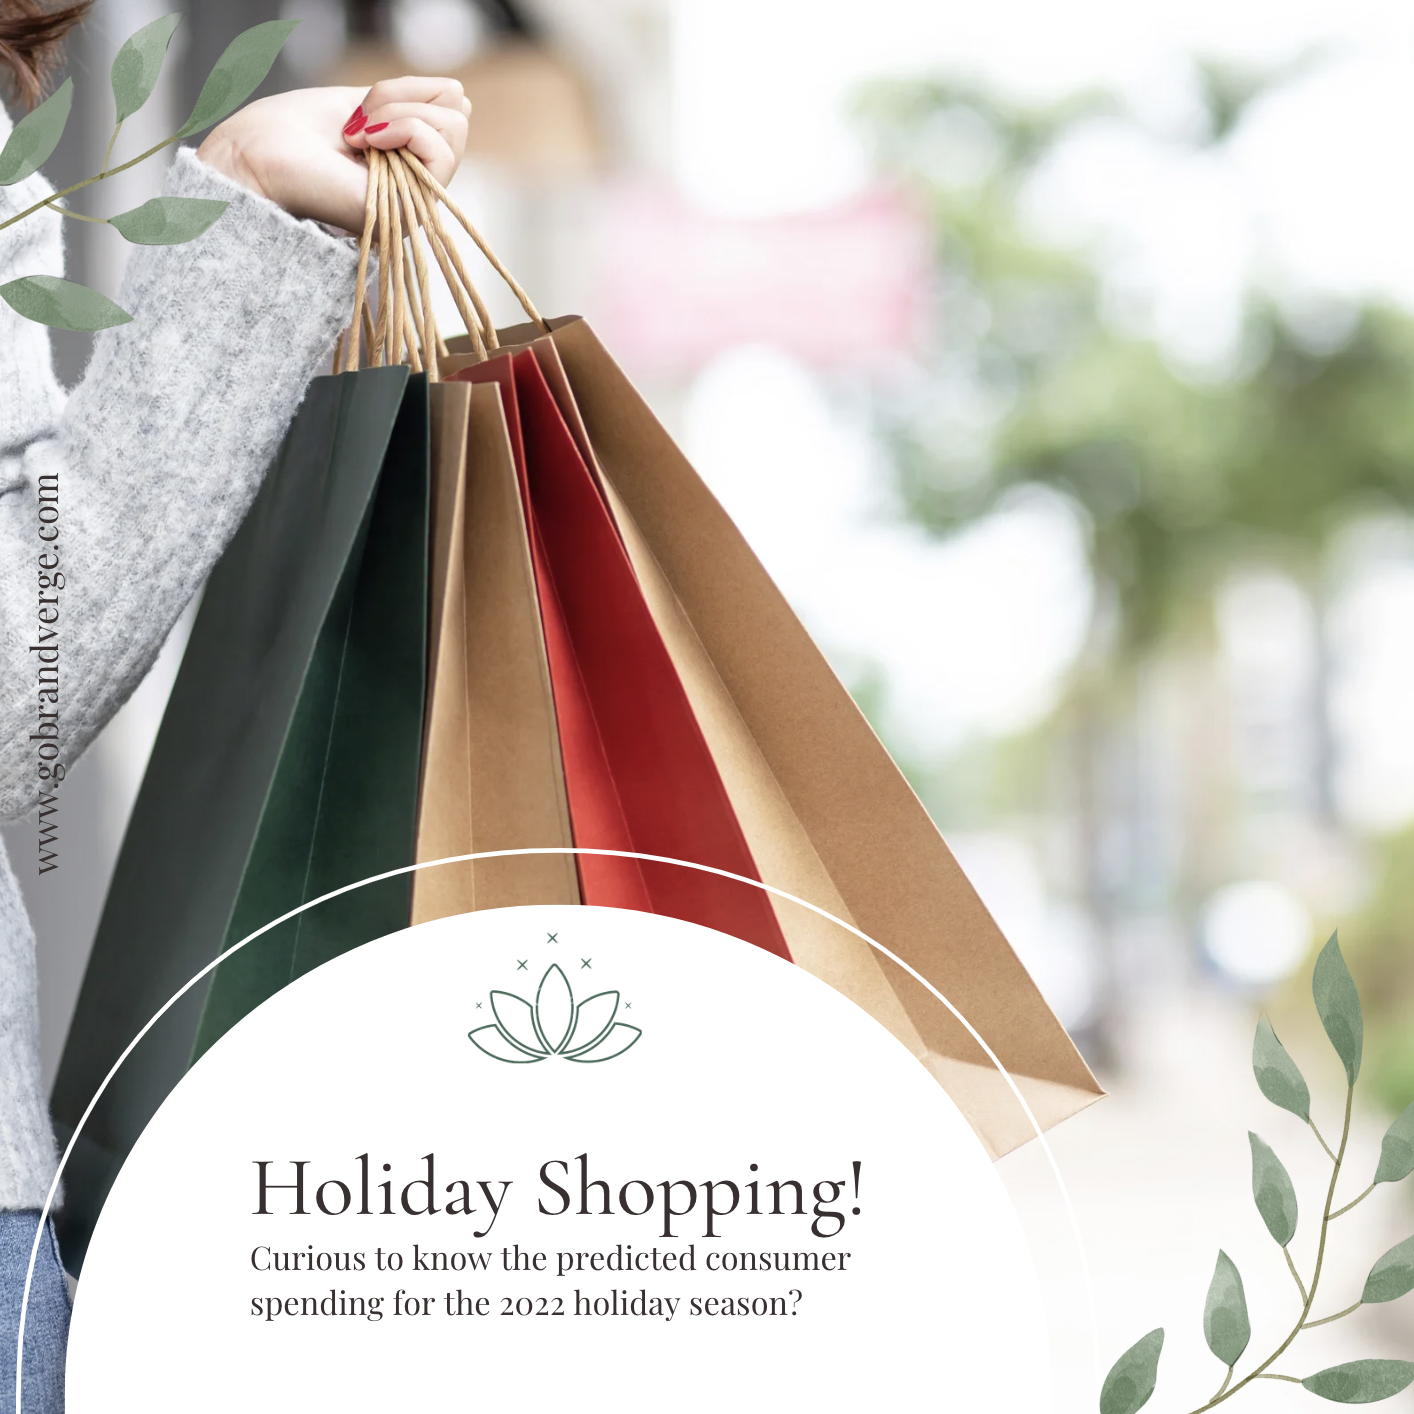 Curious to know the predicted consumer spending for this holiday season?